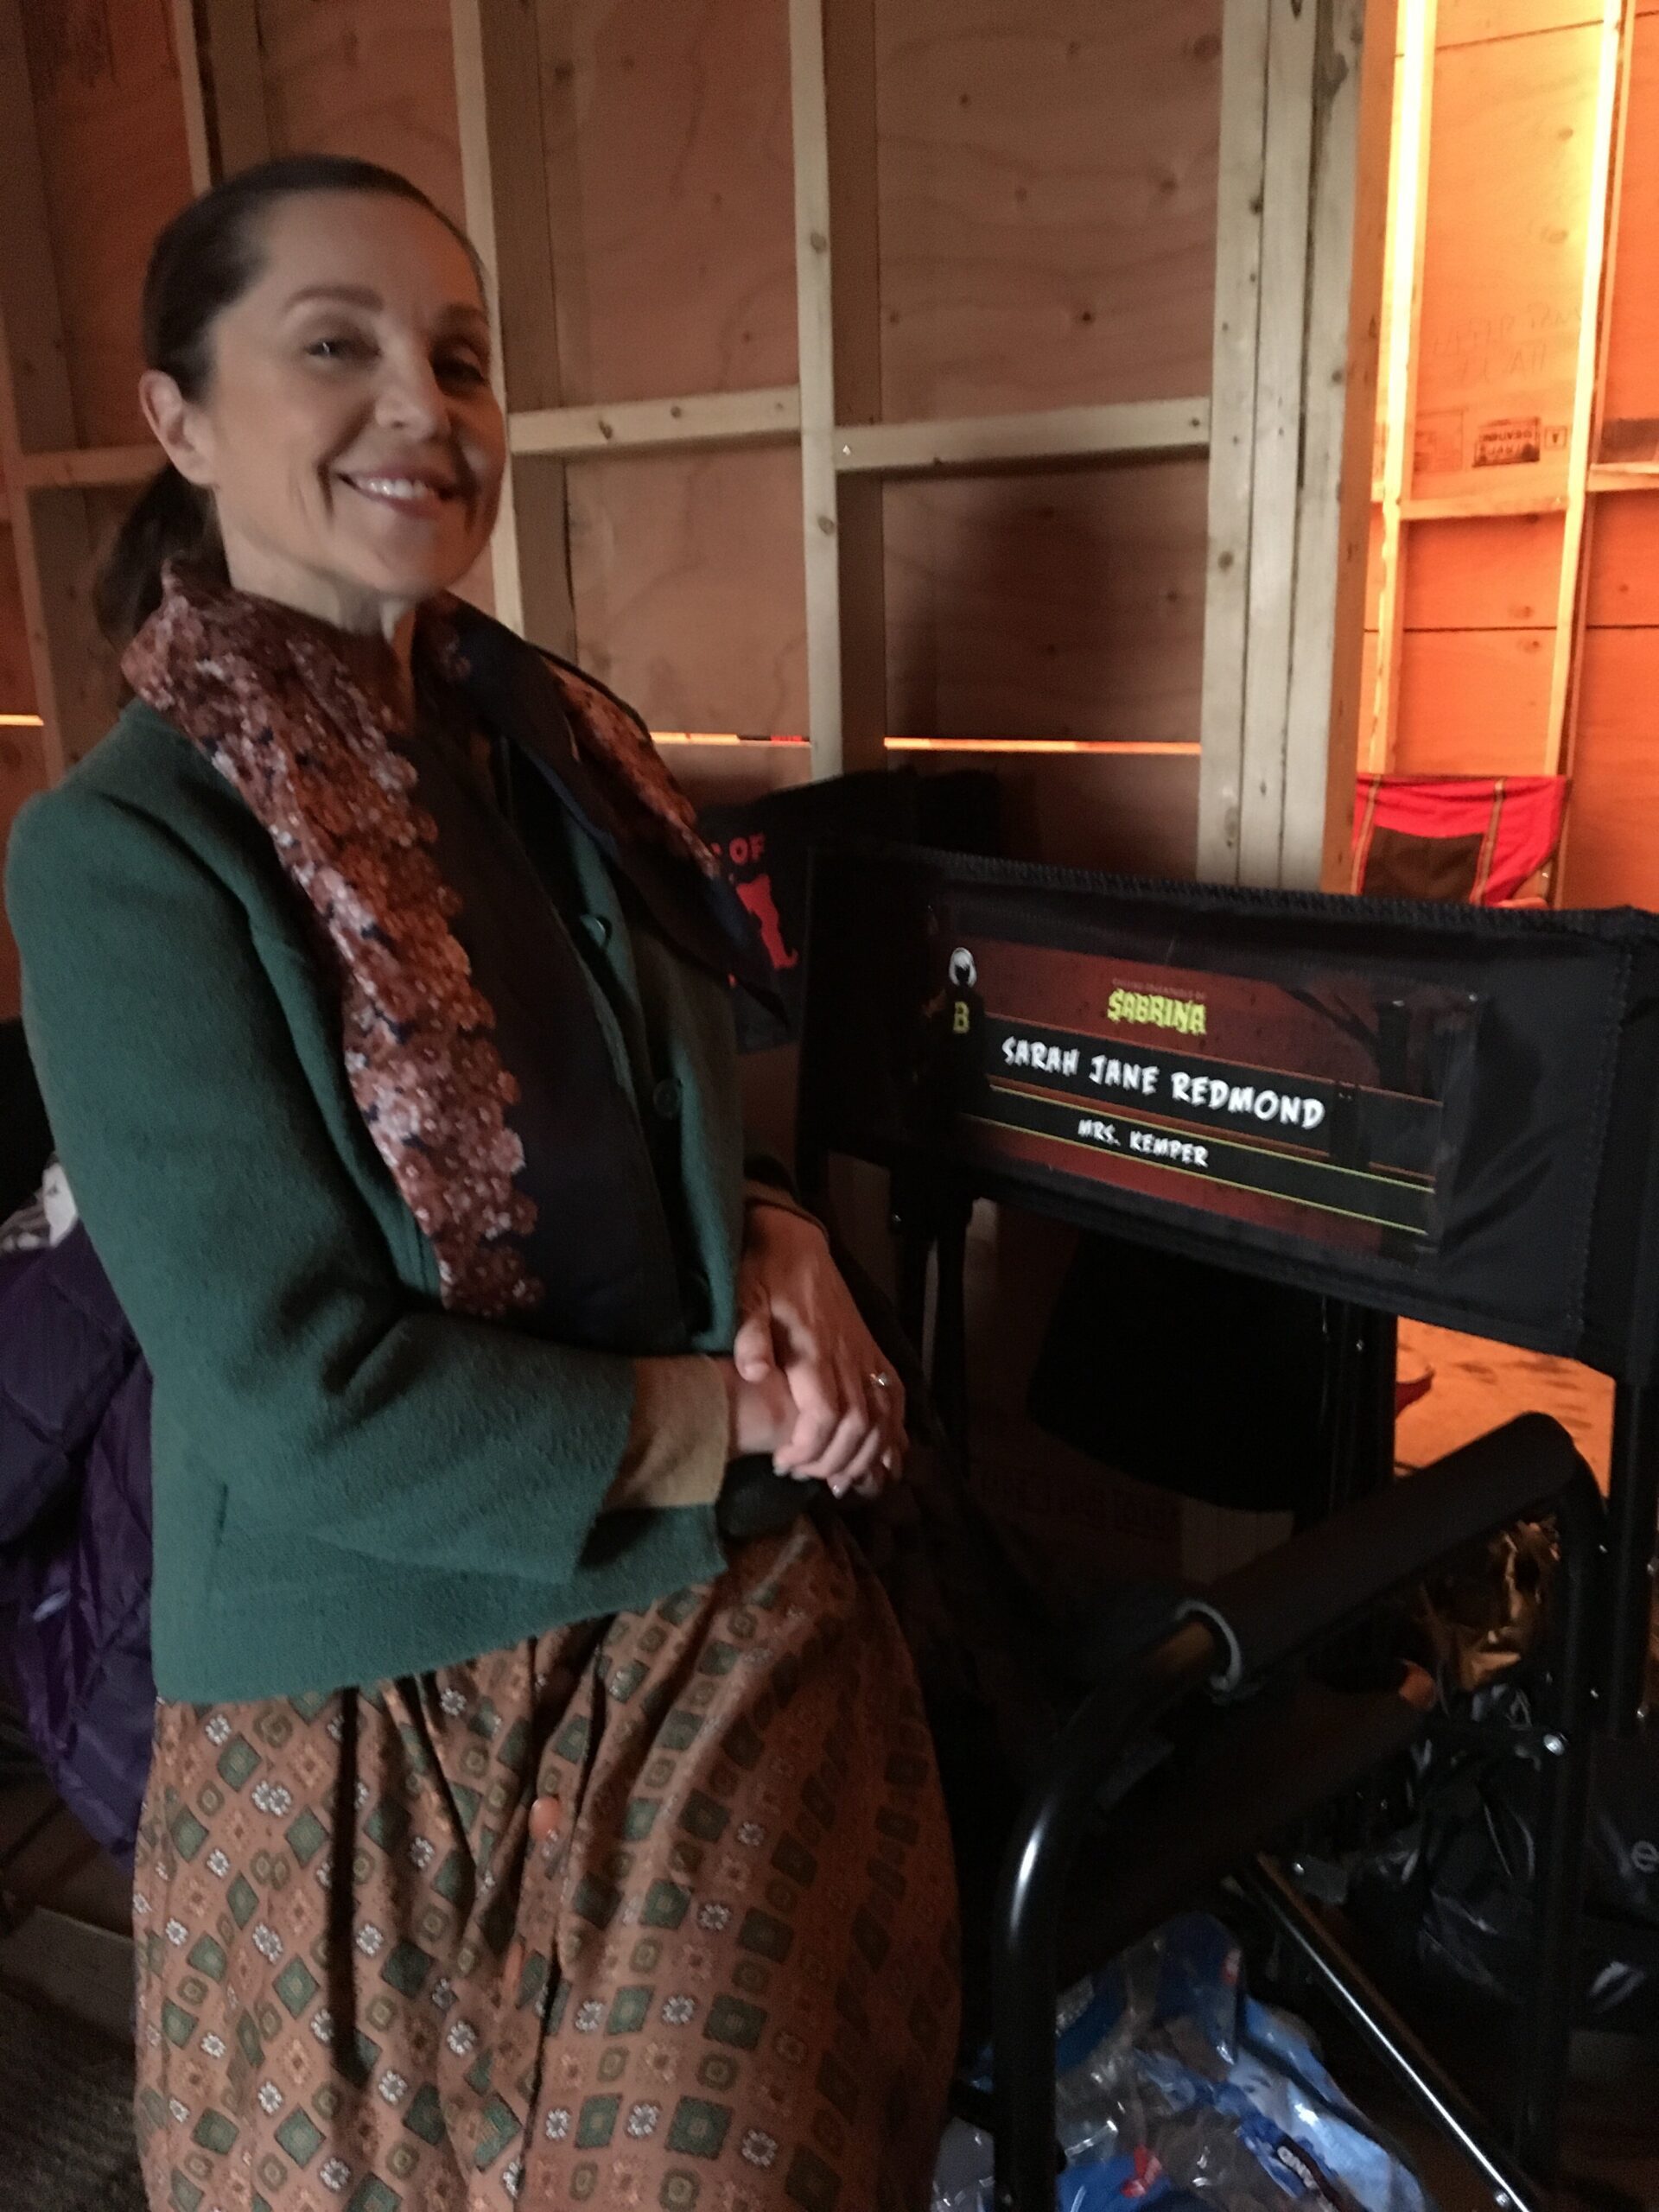 Sarah-Jane Redmond on the set of The Chilling Adventures of Sabrina